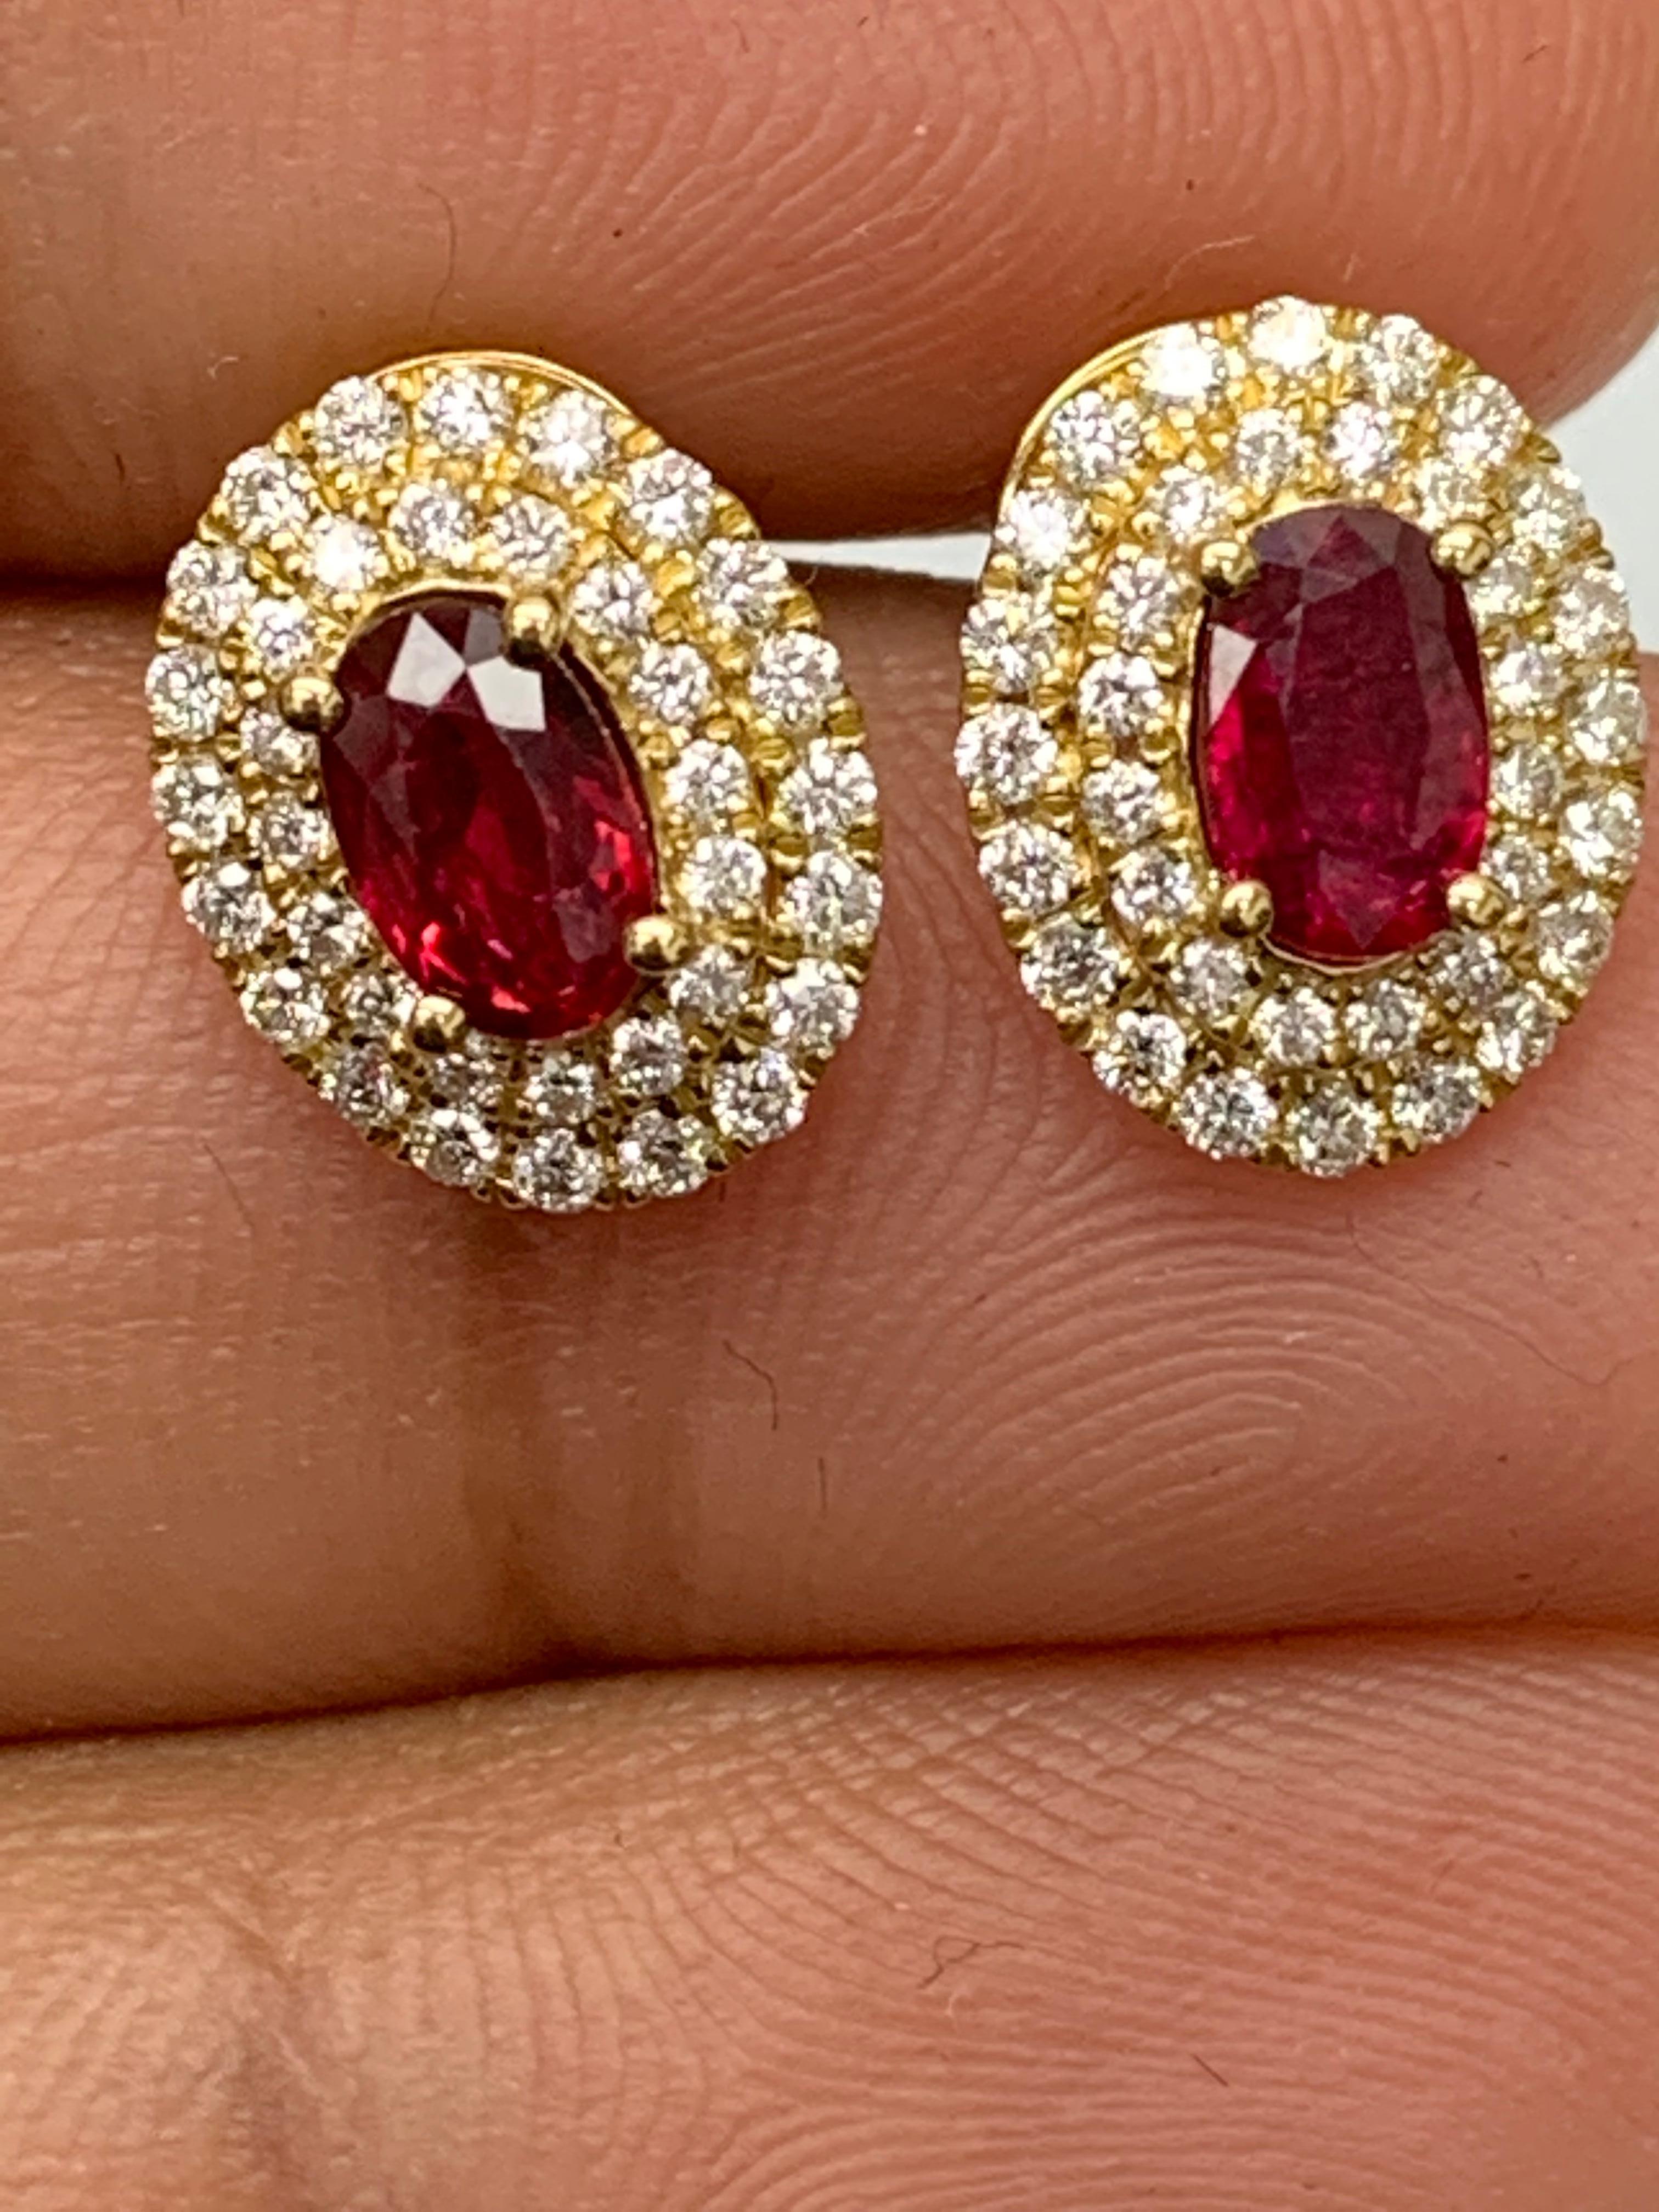 0.98 Carat Oval Cut Ruby and Diamond Stud Earrings in 18K Yellow Gold For Sale 4